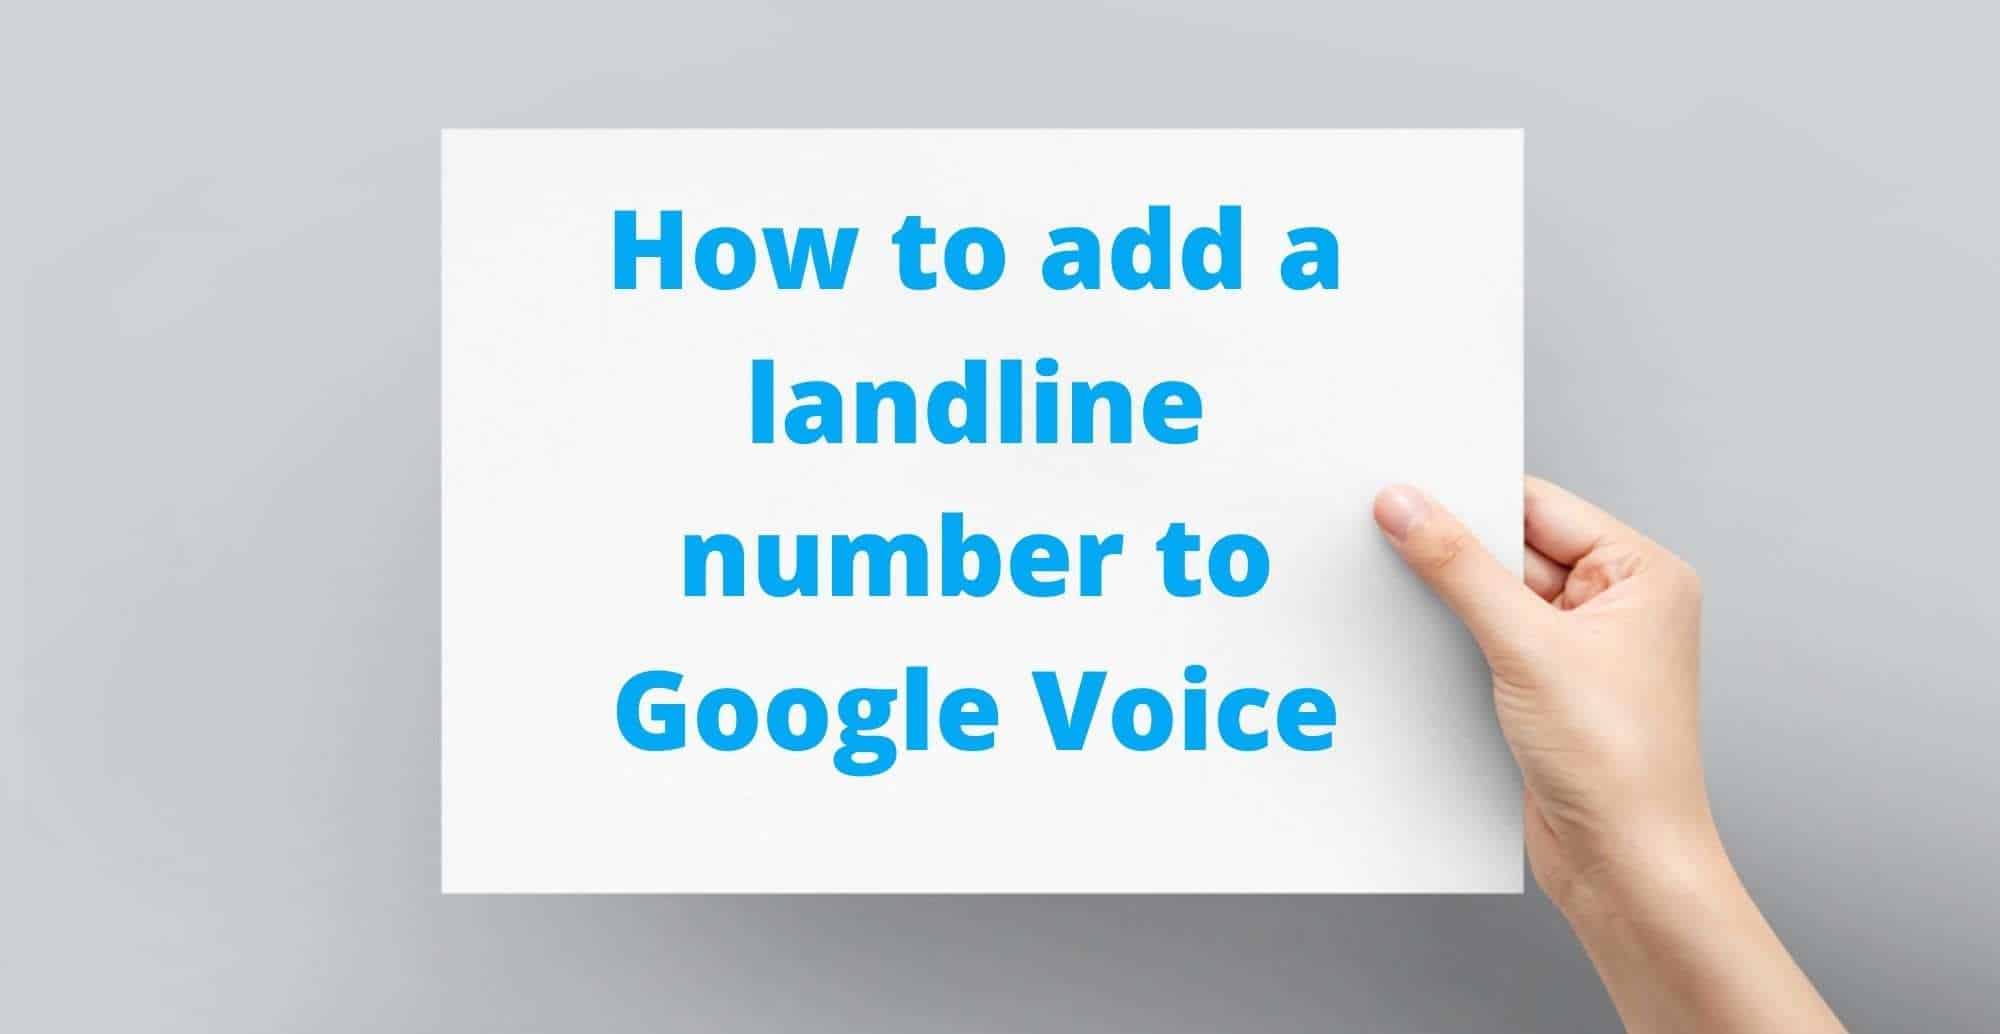 How to add a landline number to Google Voice